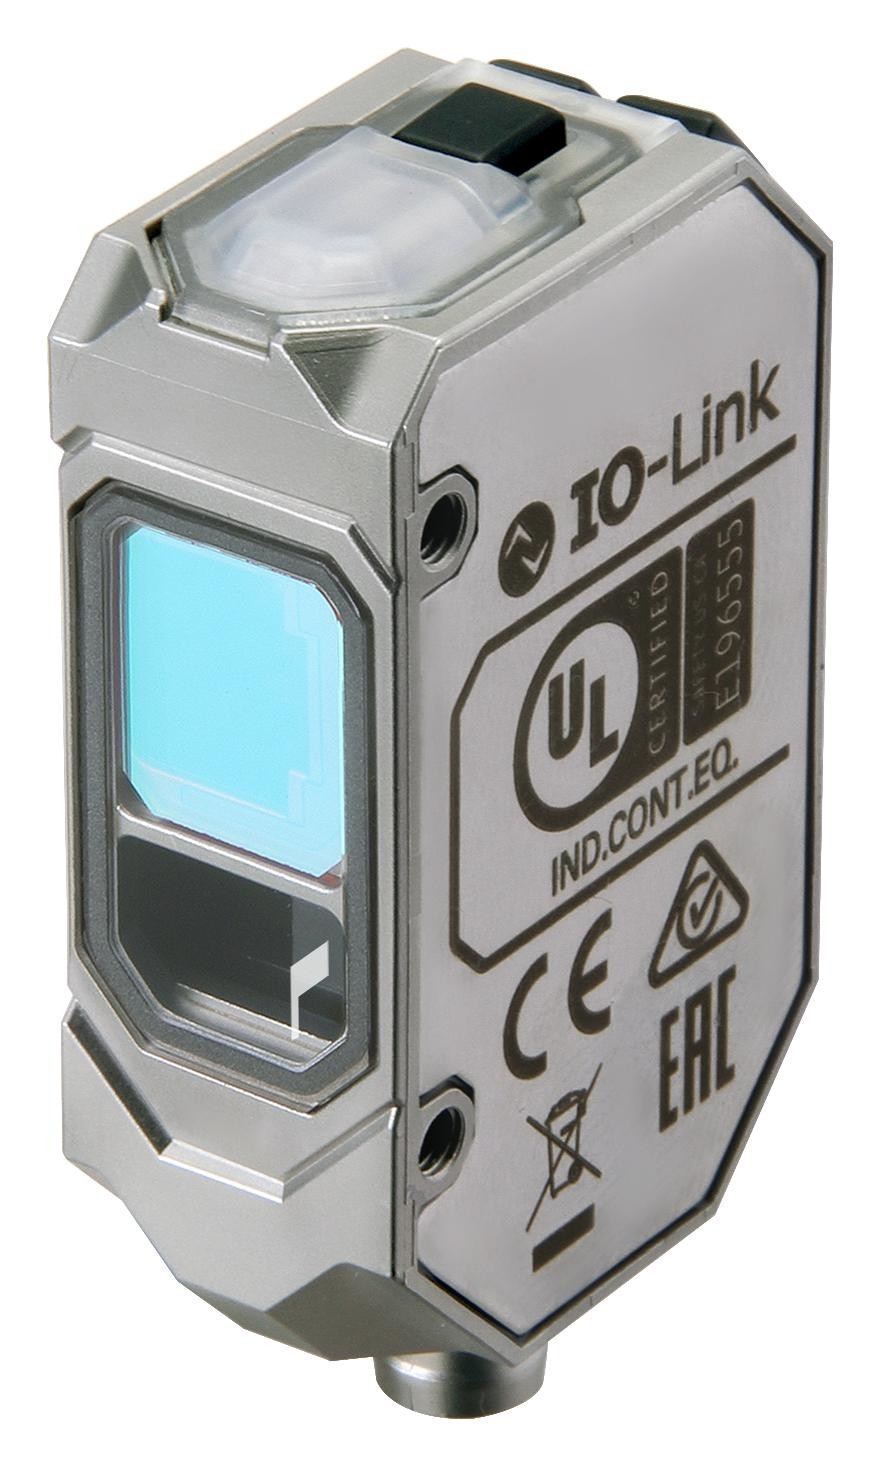 Omron Industrial Automation E3As-Hl500Mn M3 Photo Sensor, Triangulation, M8, 500mm